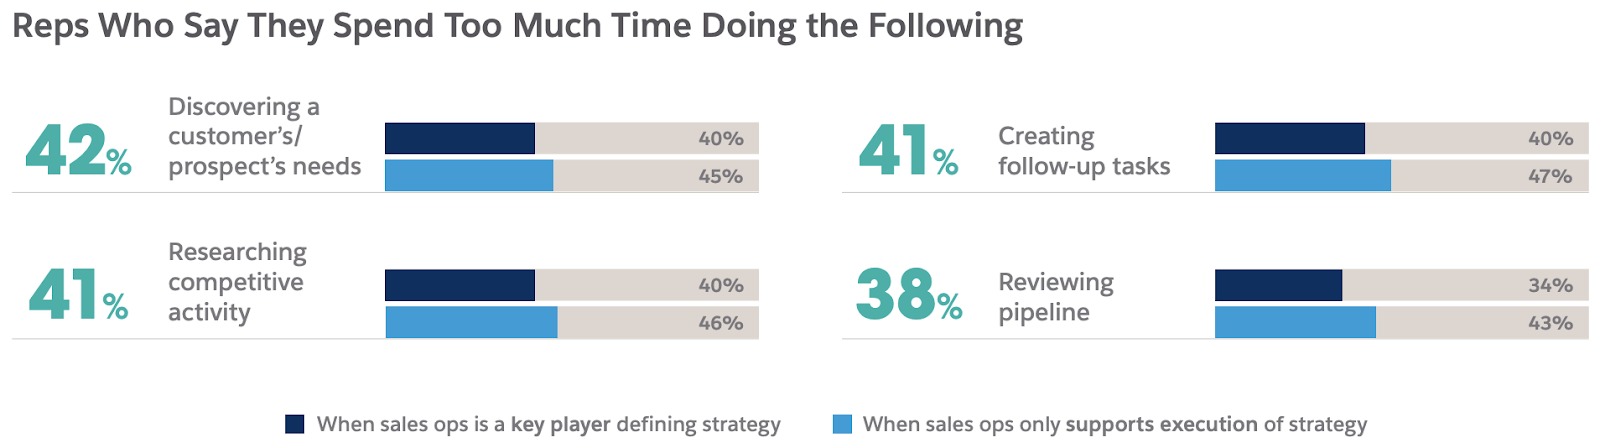 reps-spend-too-much-time-doing-the-following